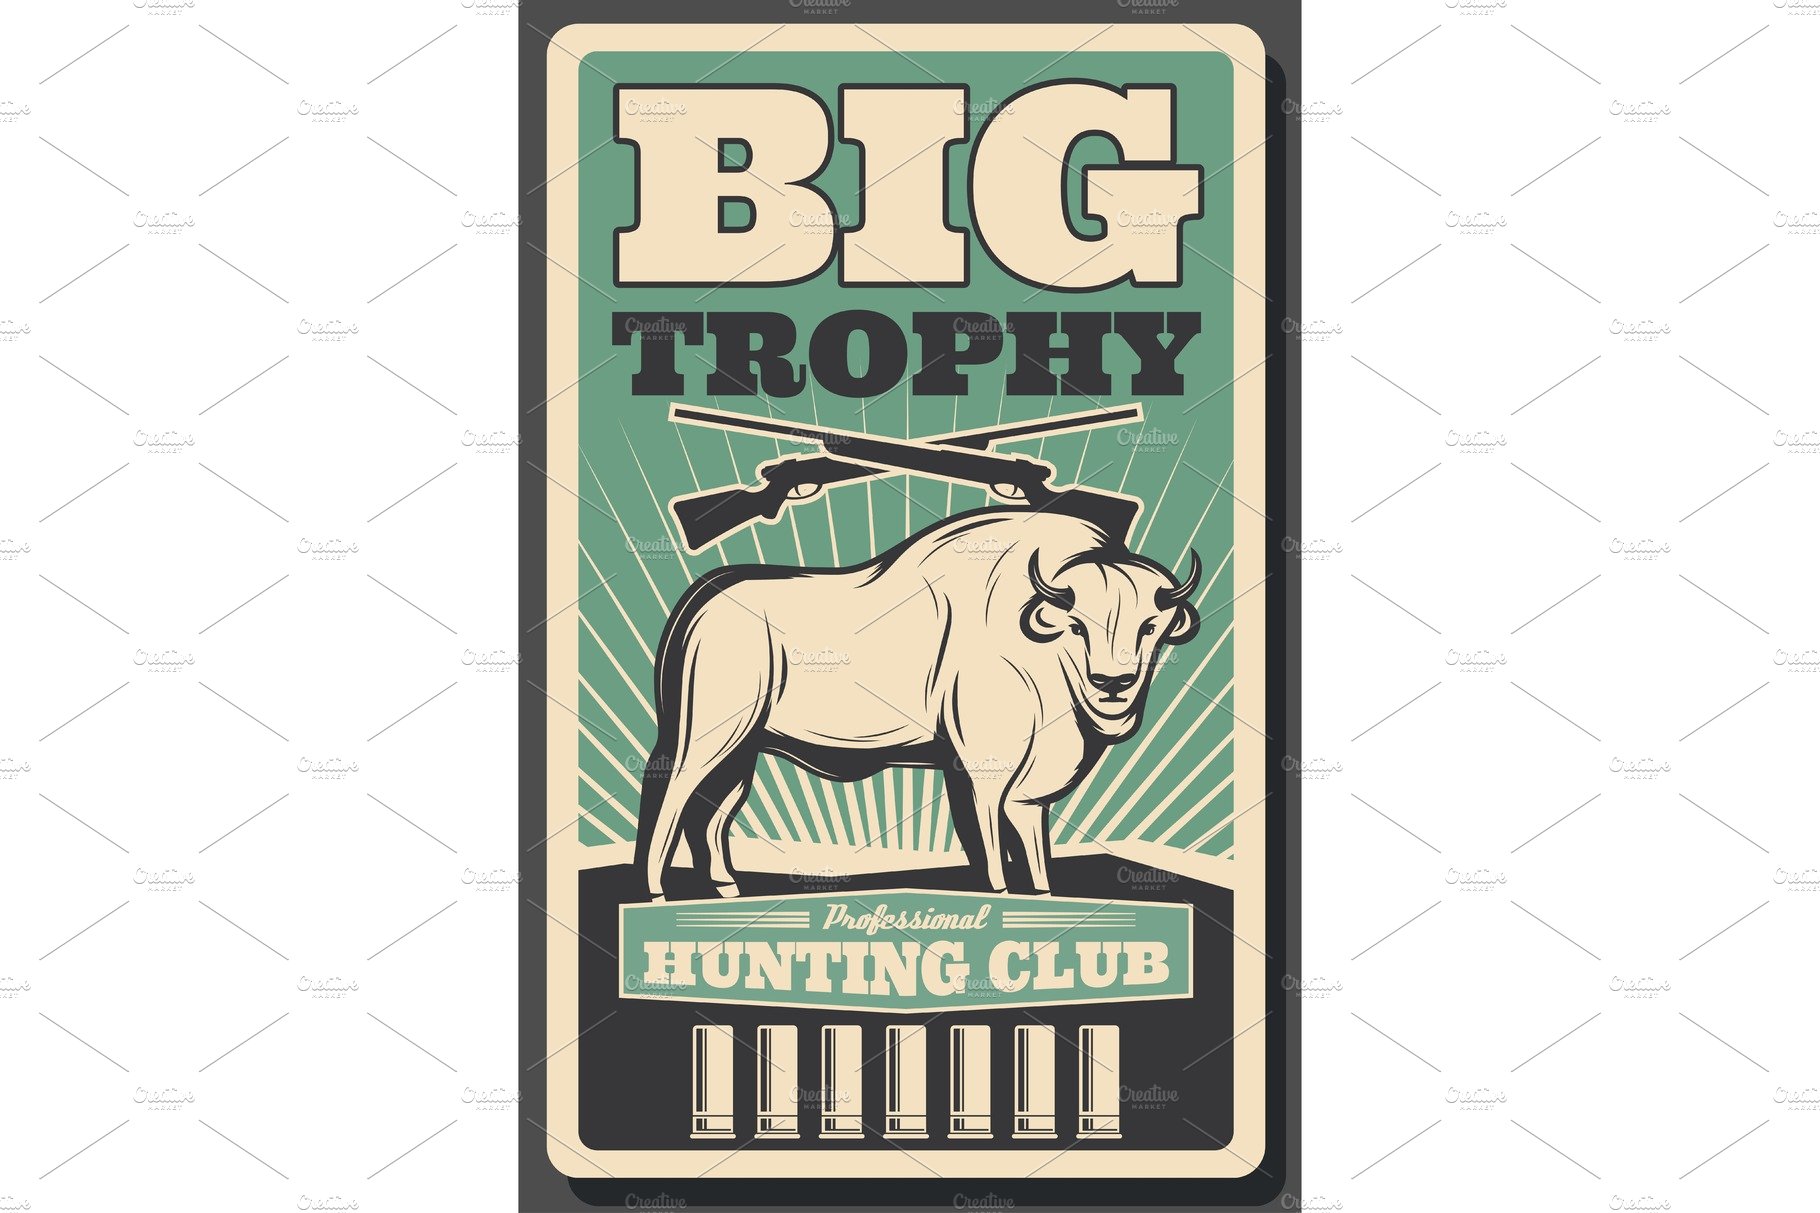 Hunting banner with bison, rifle cover image.